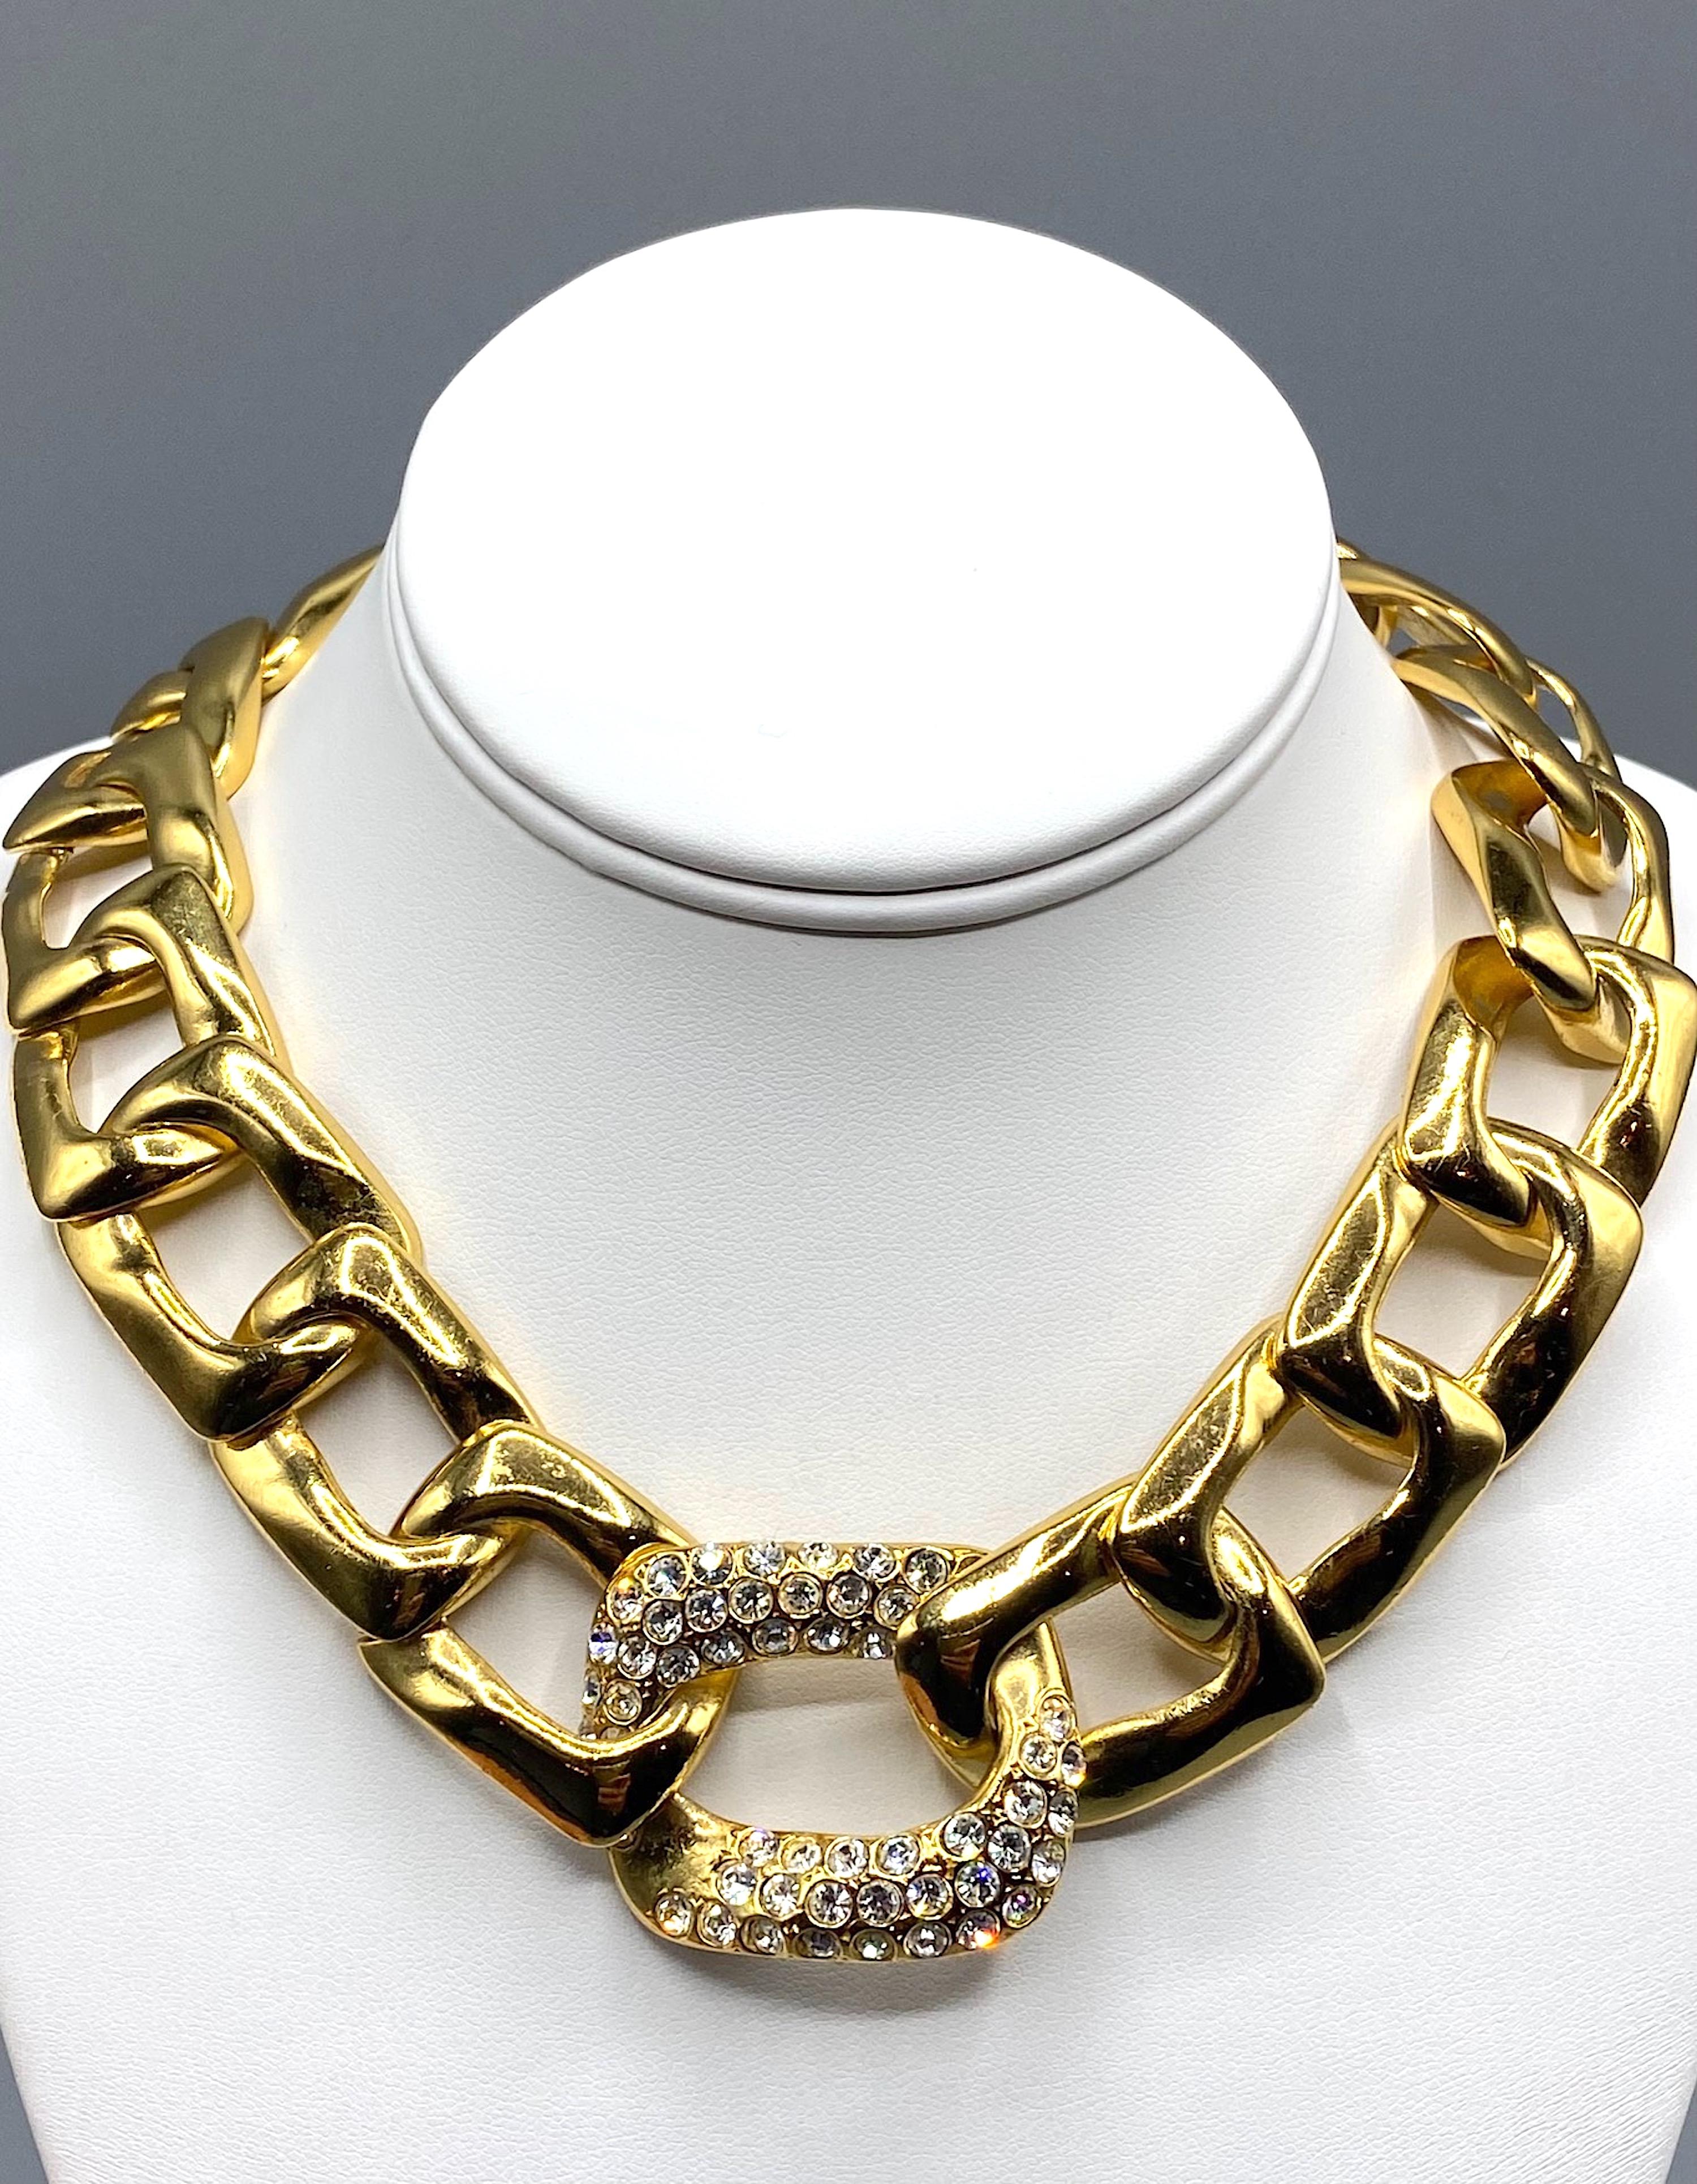 Classic 1980s design is this gold plate  Yves Saint Laurent necklace large link necklace.
The central and largest link is 1.5 inches high and set with rhinestones. From the center rhinestone link, each chain gradually get smaller toward the back of